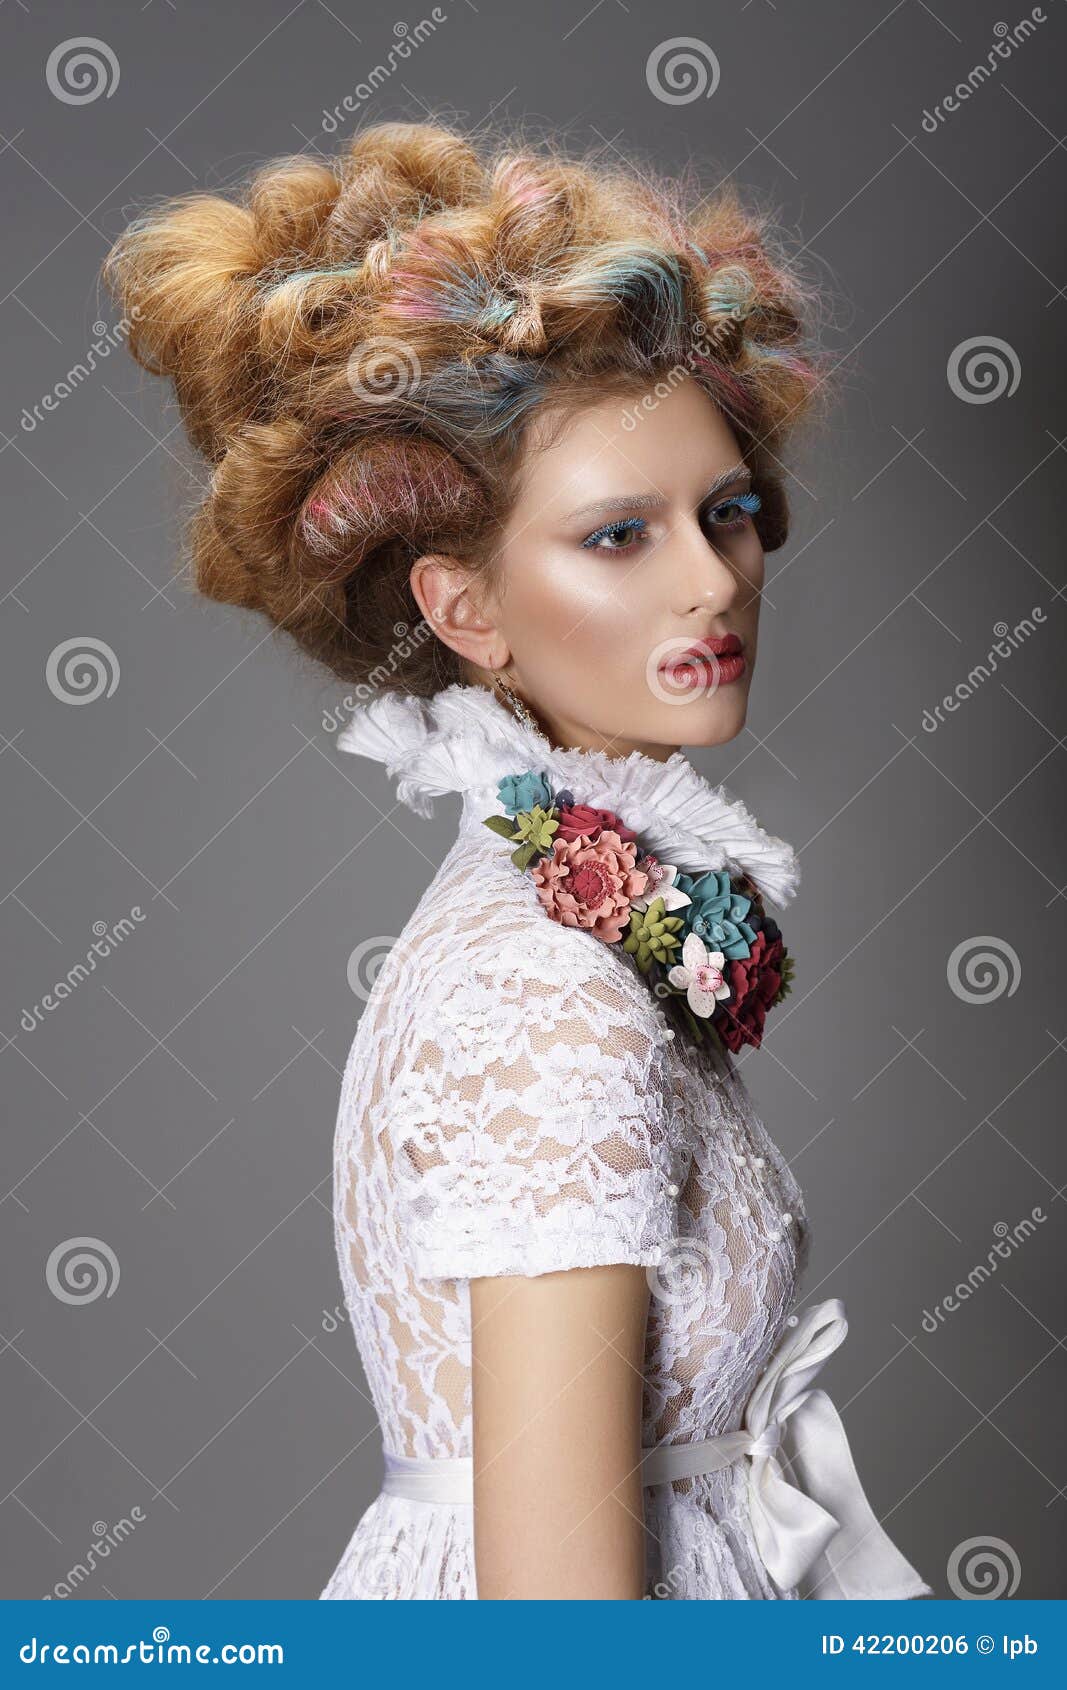 Updo. Dyed Hair. Woman With Modern Hairstyle. High Fashion 